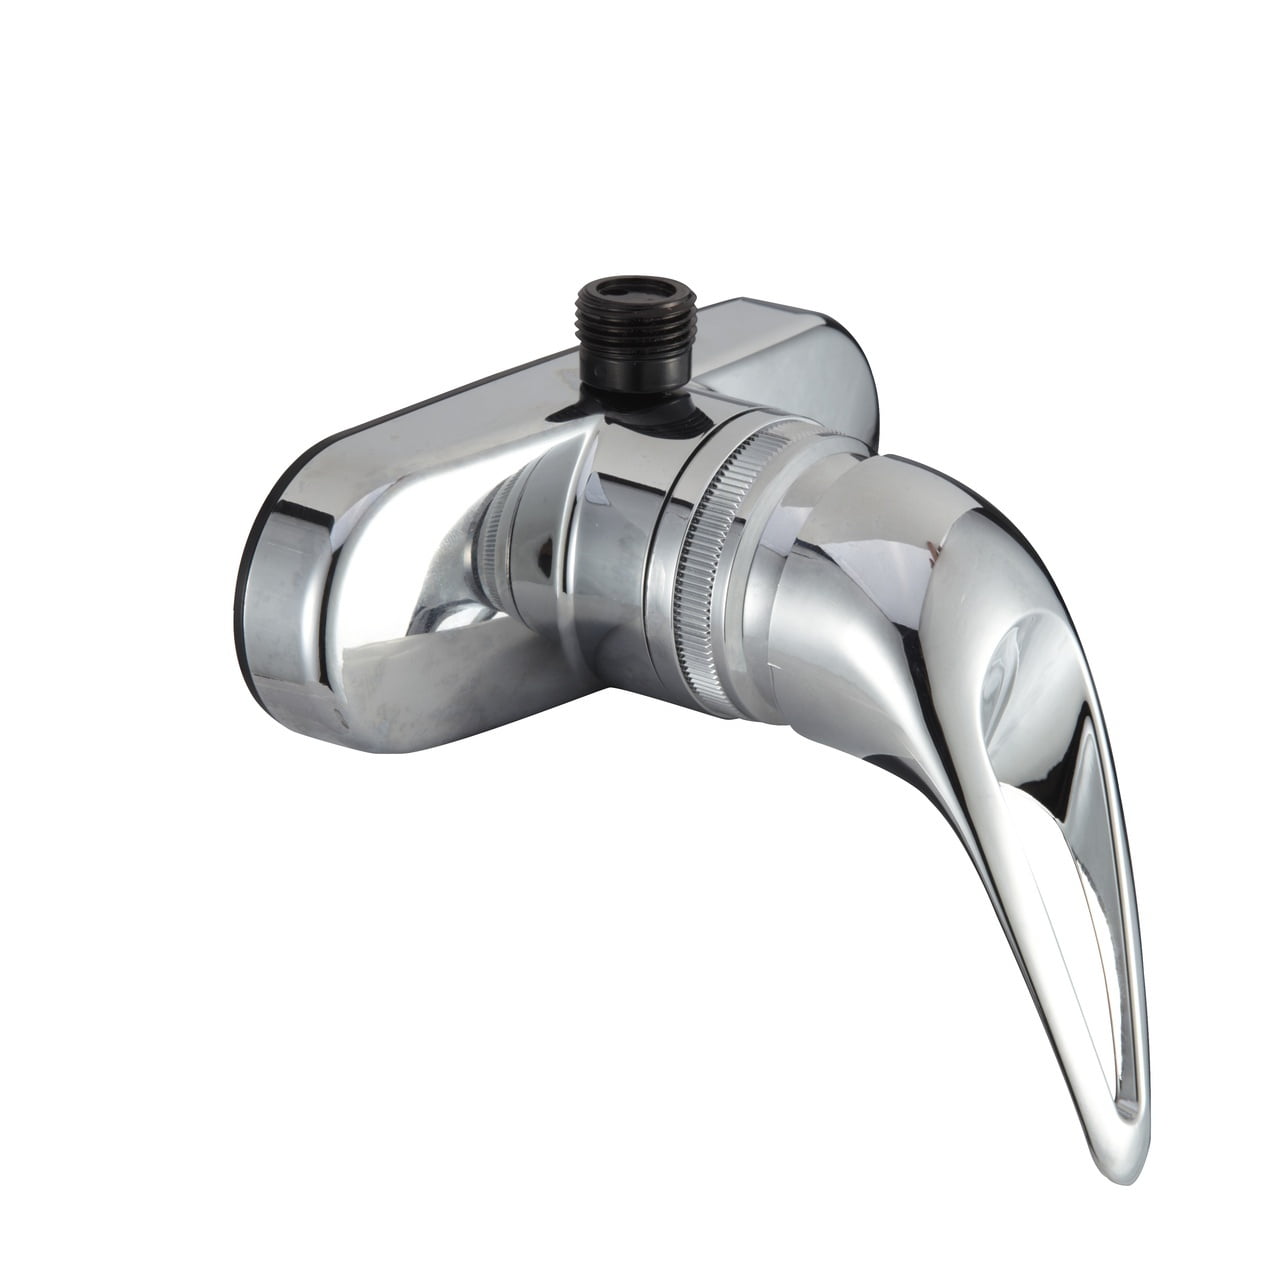 Brushed Satin Nickel Dura Faucet DF-SA110LH-SN RV Tub & Shower Faucet Valve Diverter with Winged Levers 